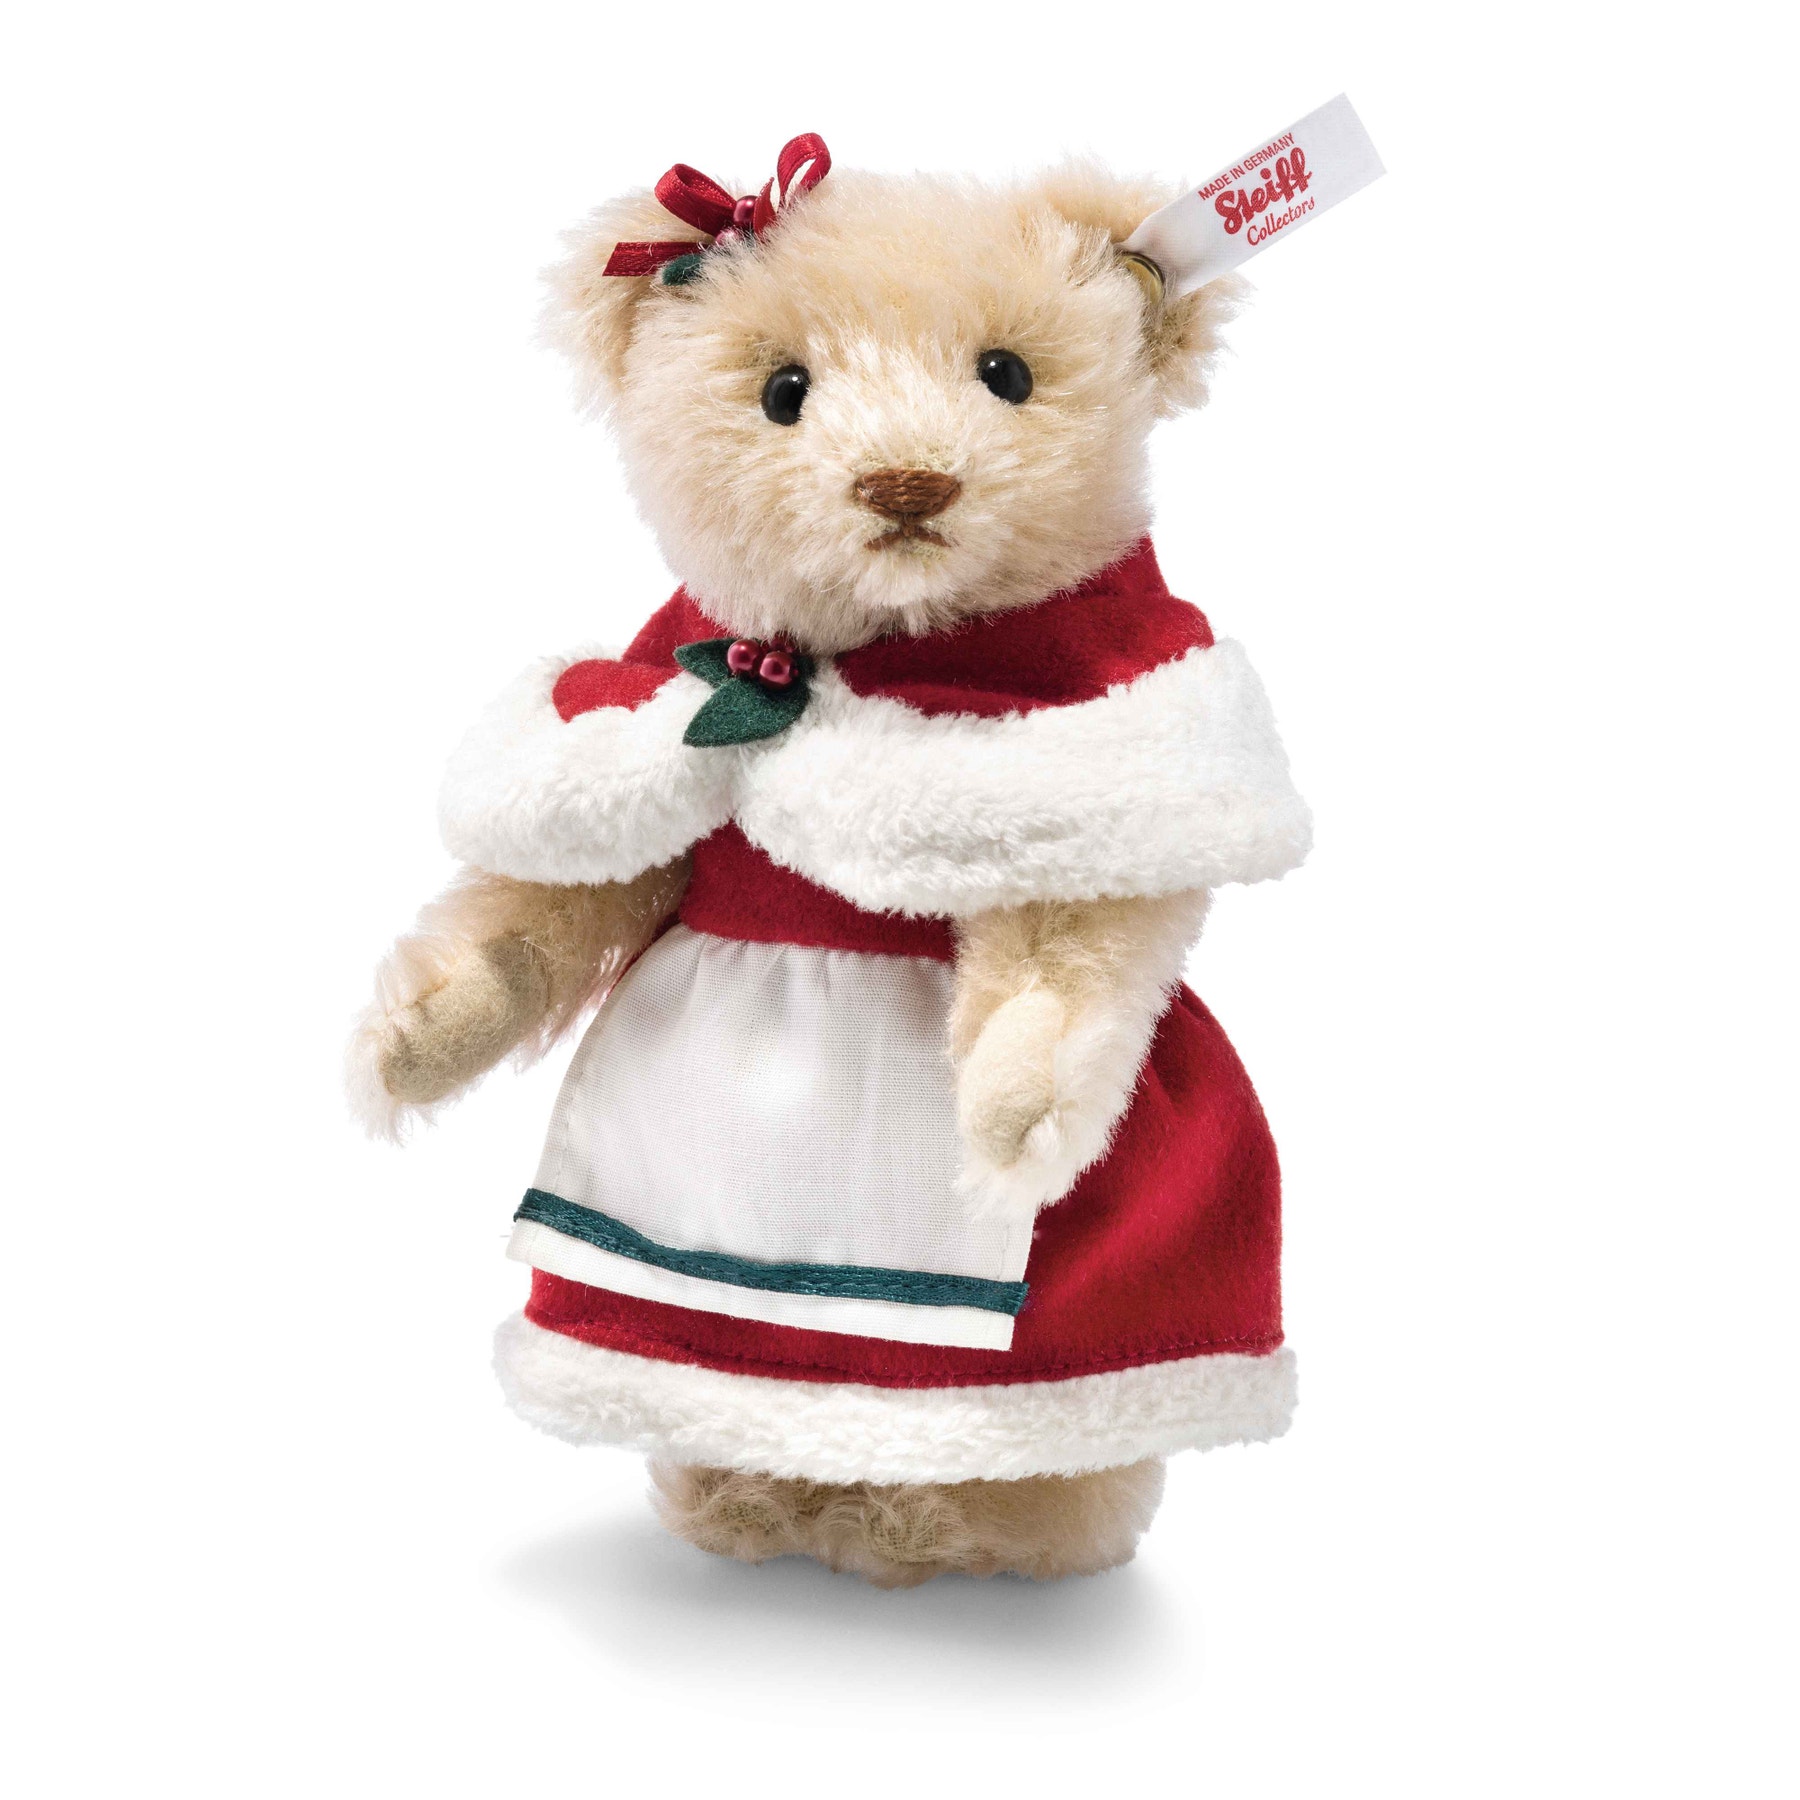 Ours Teddy Mrs Claus